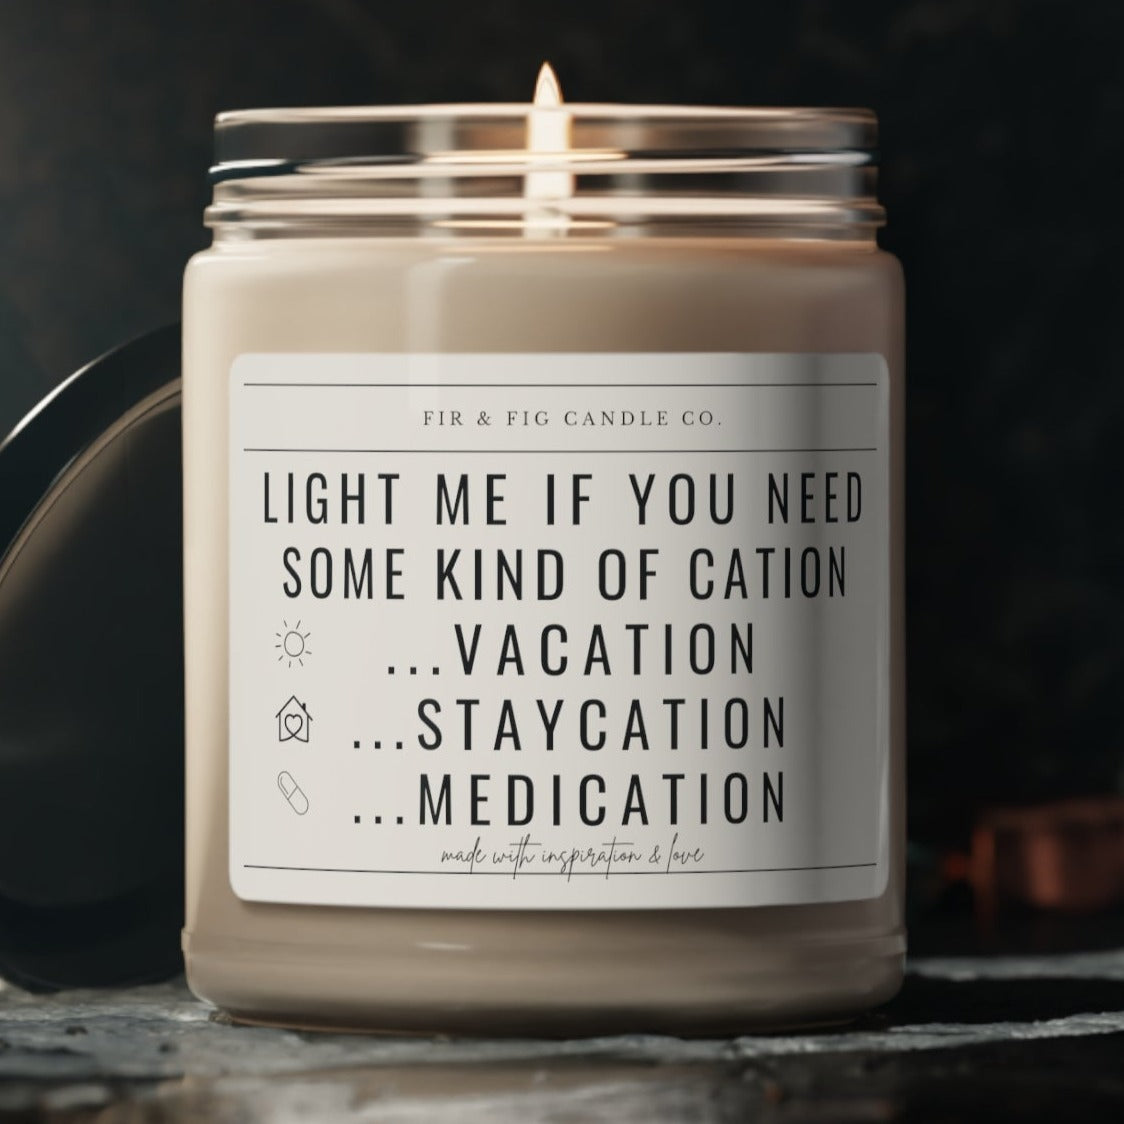 Vacation Staycation Medication Eco-Friendly 100% Soy Candle, Airbnb Welcome candle, Staycation Candle, Candle Gift for Stay At Home Vacation